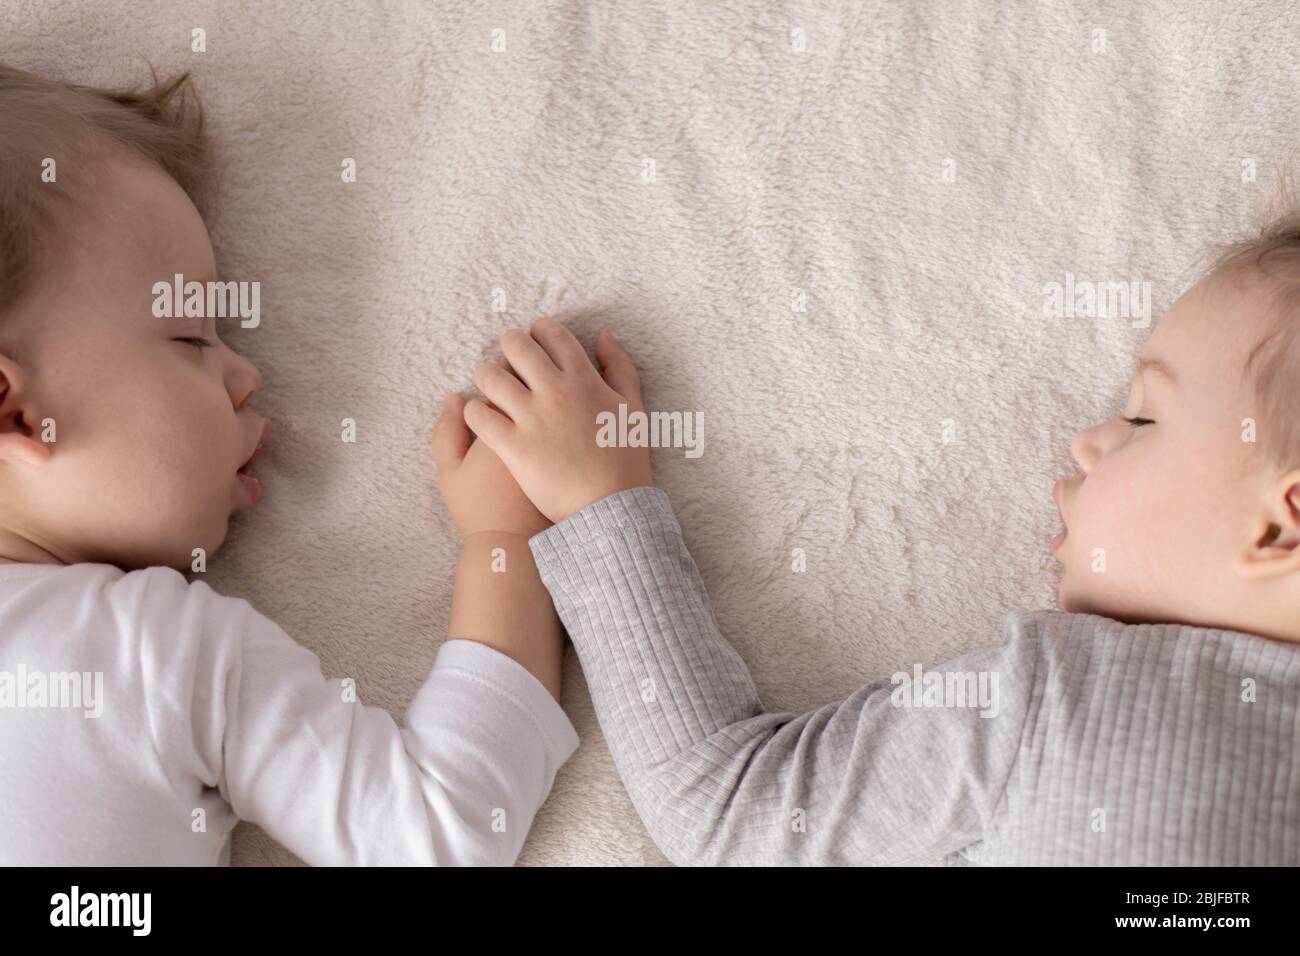 Childhood, sleep, relaxation, family, lifestyle concept - two young children 2 and 3 years old dressed in white and beige bodysuit sleep on a beige Stock Photo